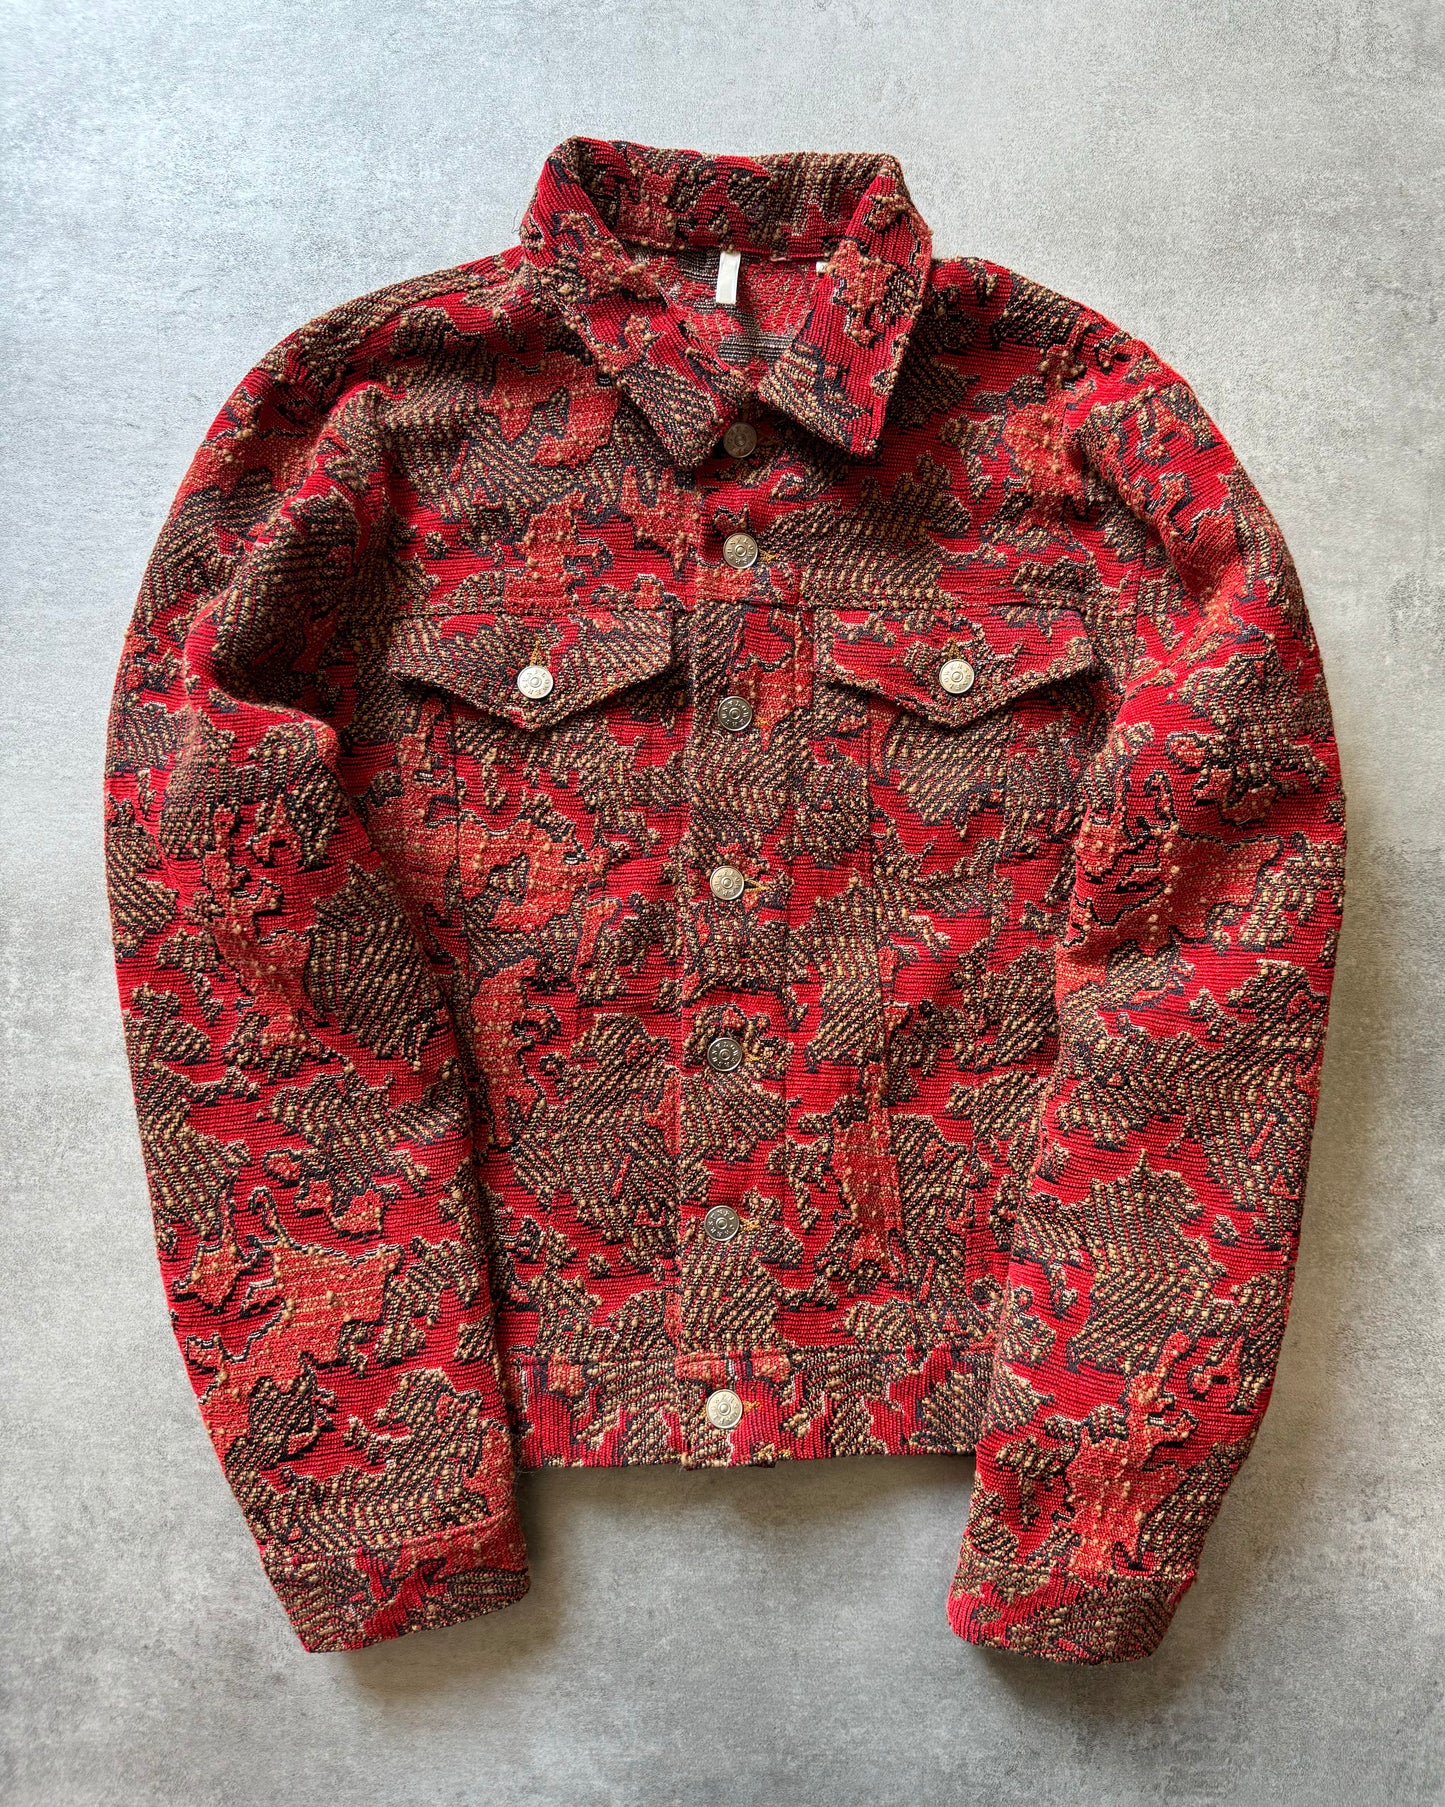 SS2020 Sunflower Red Jacquard Jacket  (L) - 5